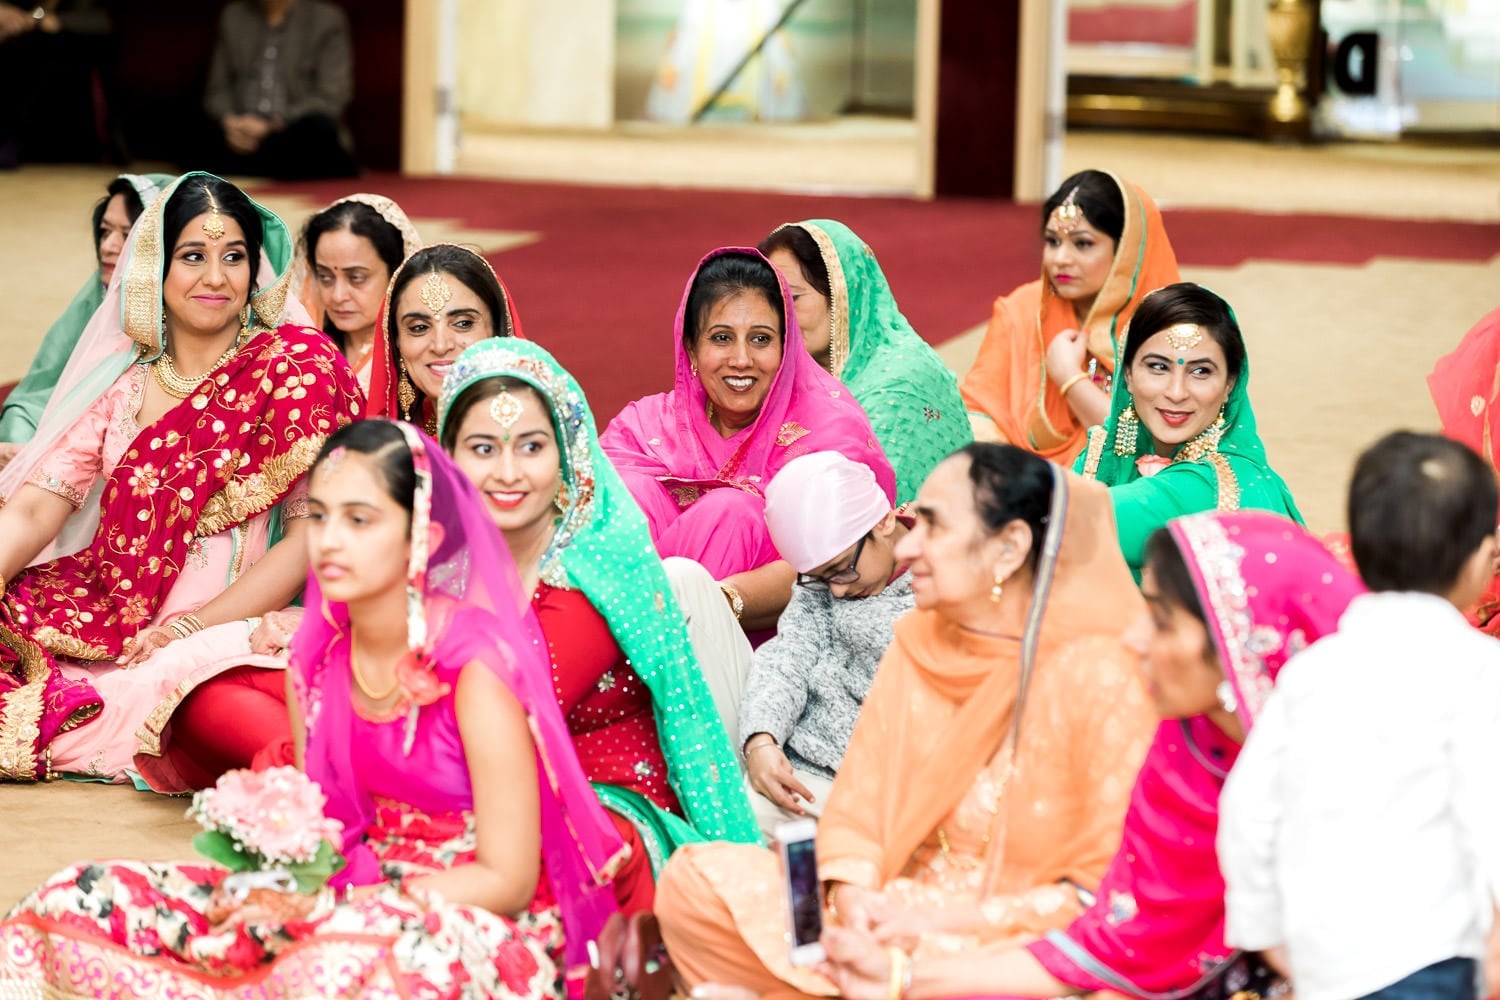 Candid moments during Indian wedding ceremony at the temple | Indian wedding photography Vancouver